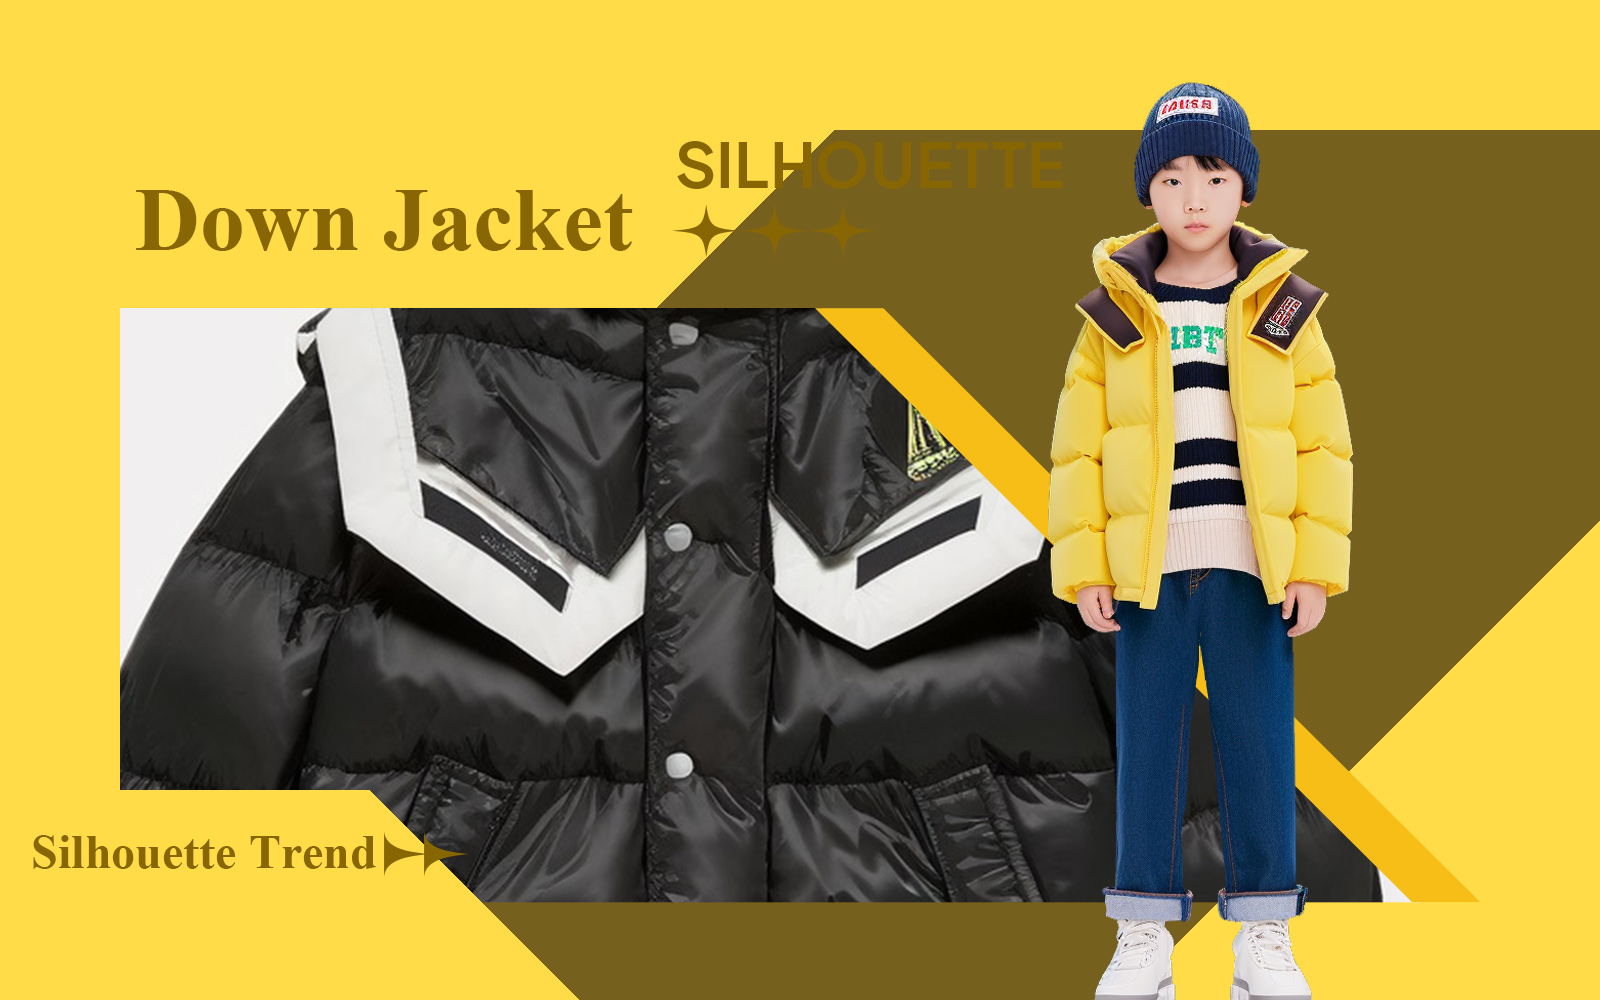 The Silhouette Trend for Kids' Down Jacket